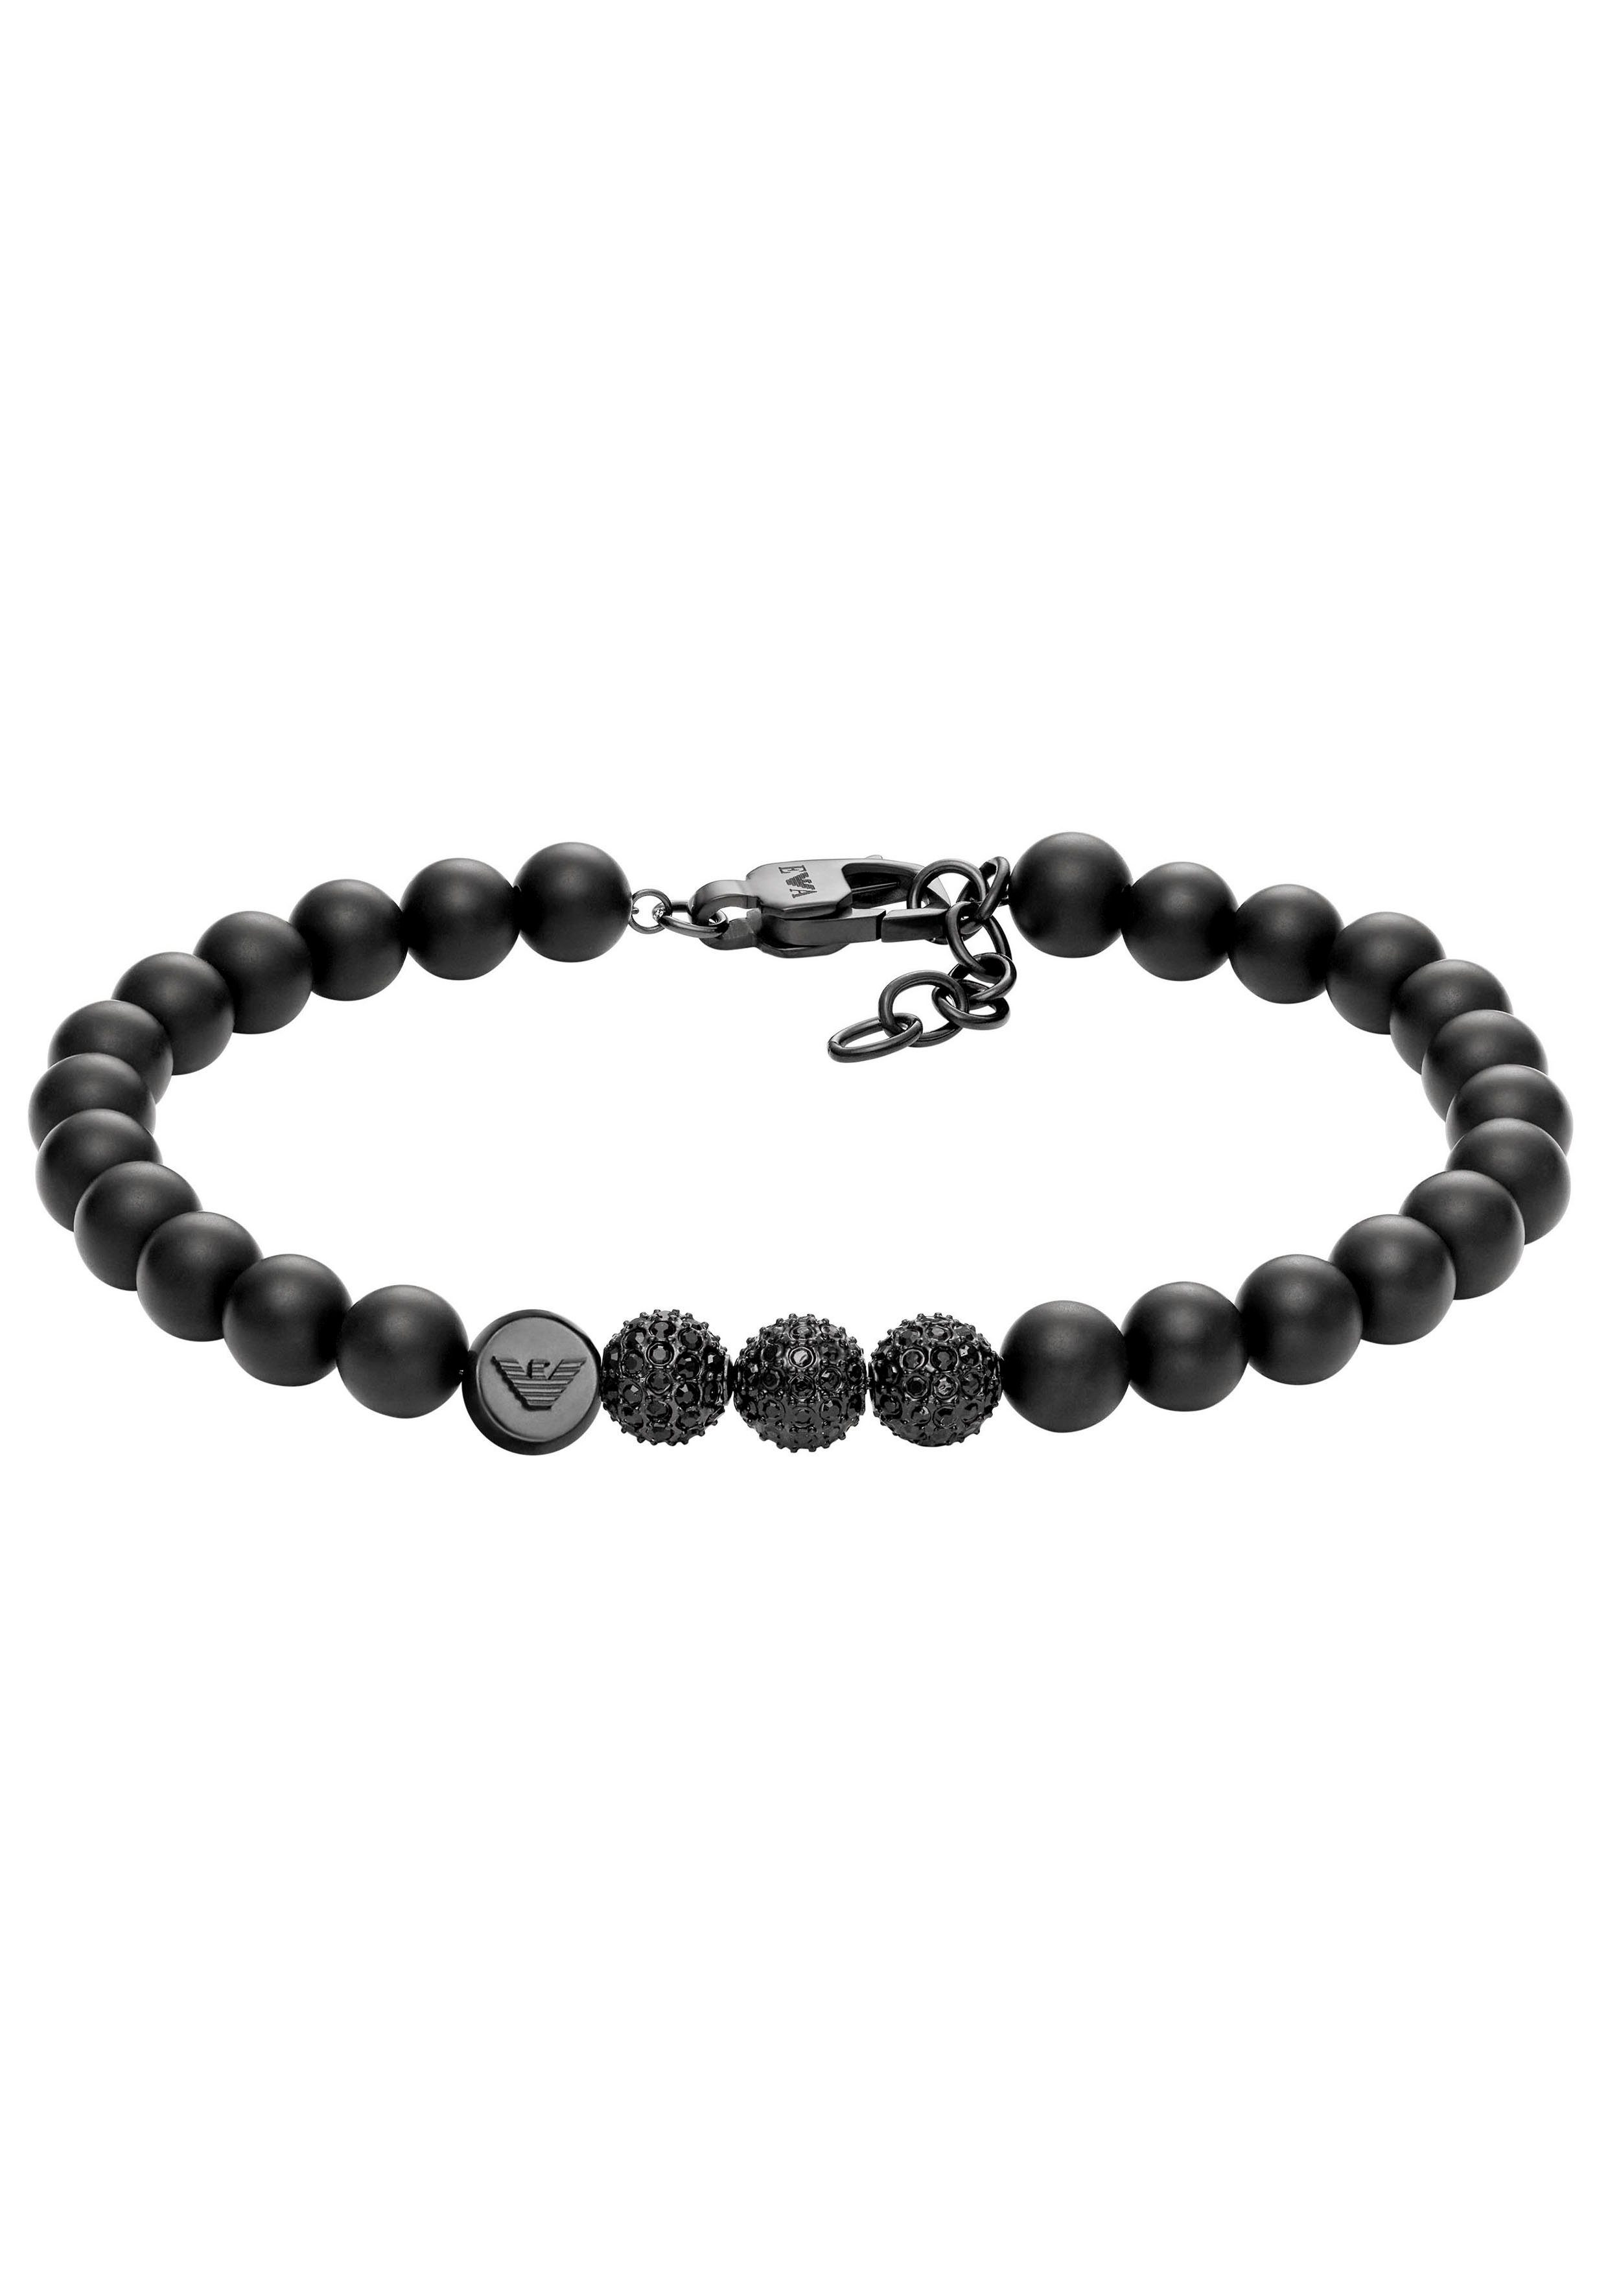 und TREND, Onyx Gagat ICONIC Emporio BEADS mit EGS3030001, Armani Armband AND PAVE,